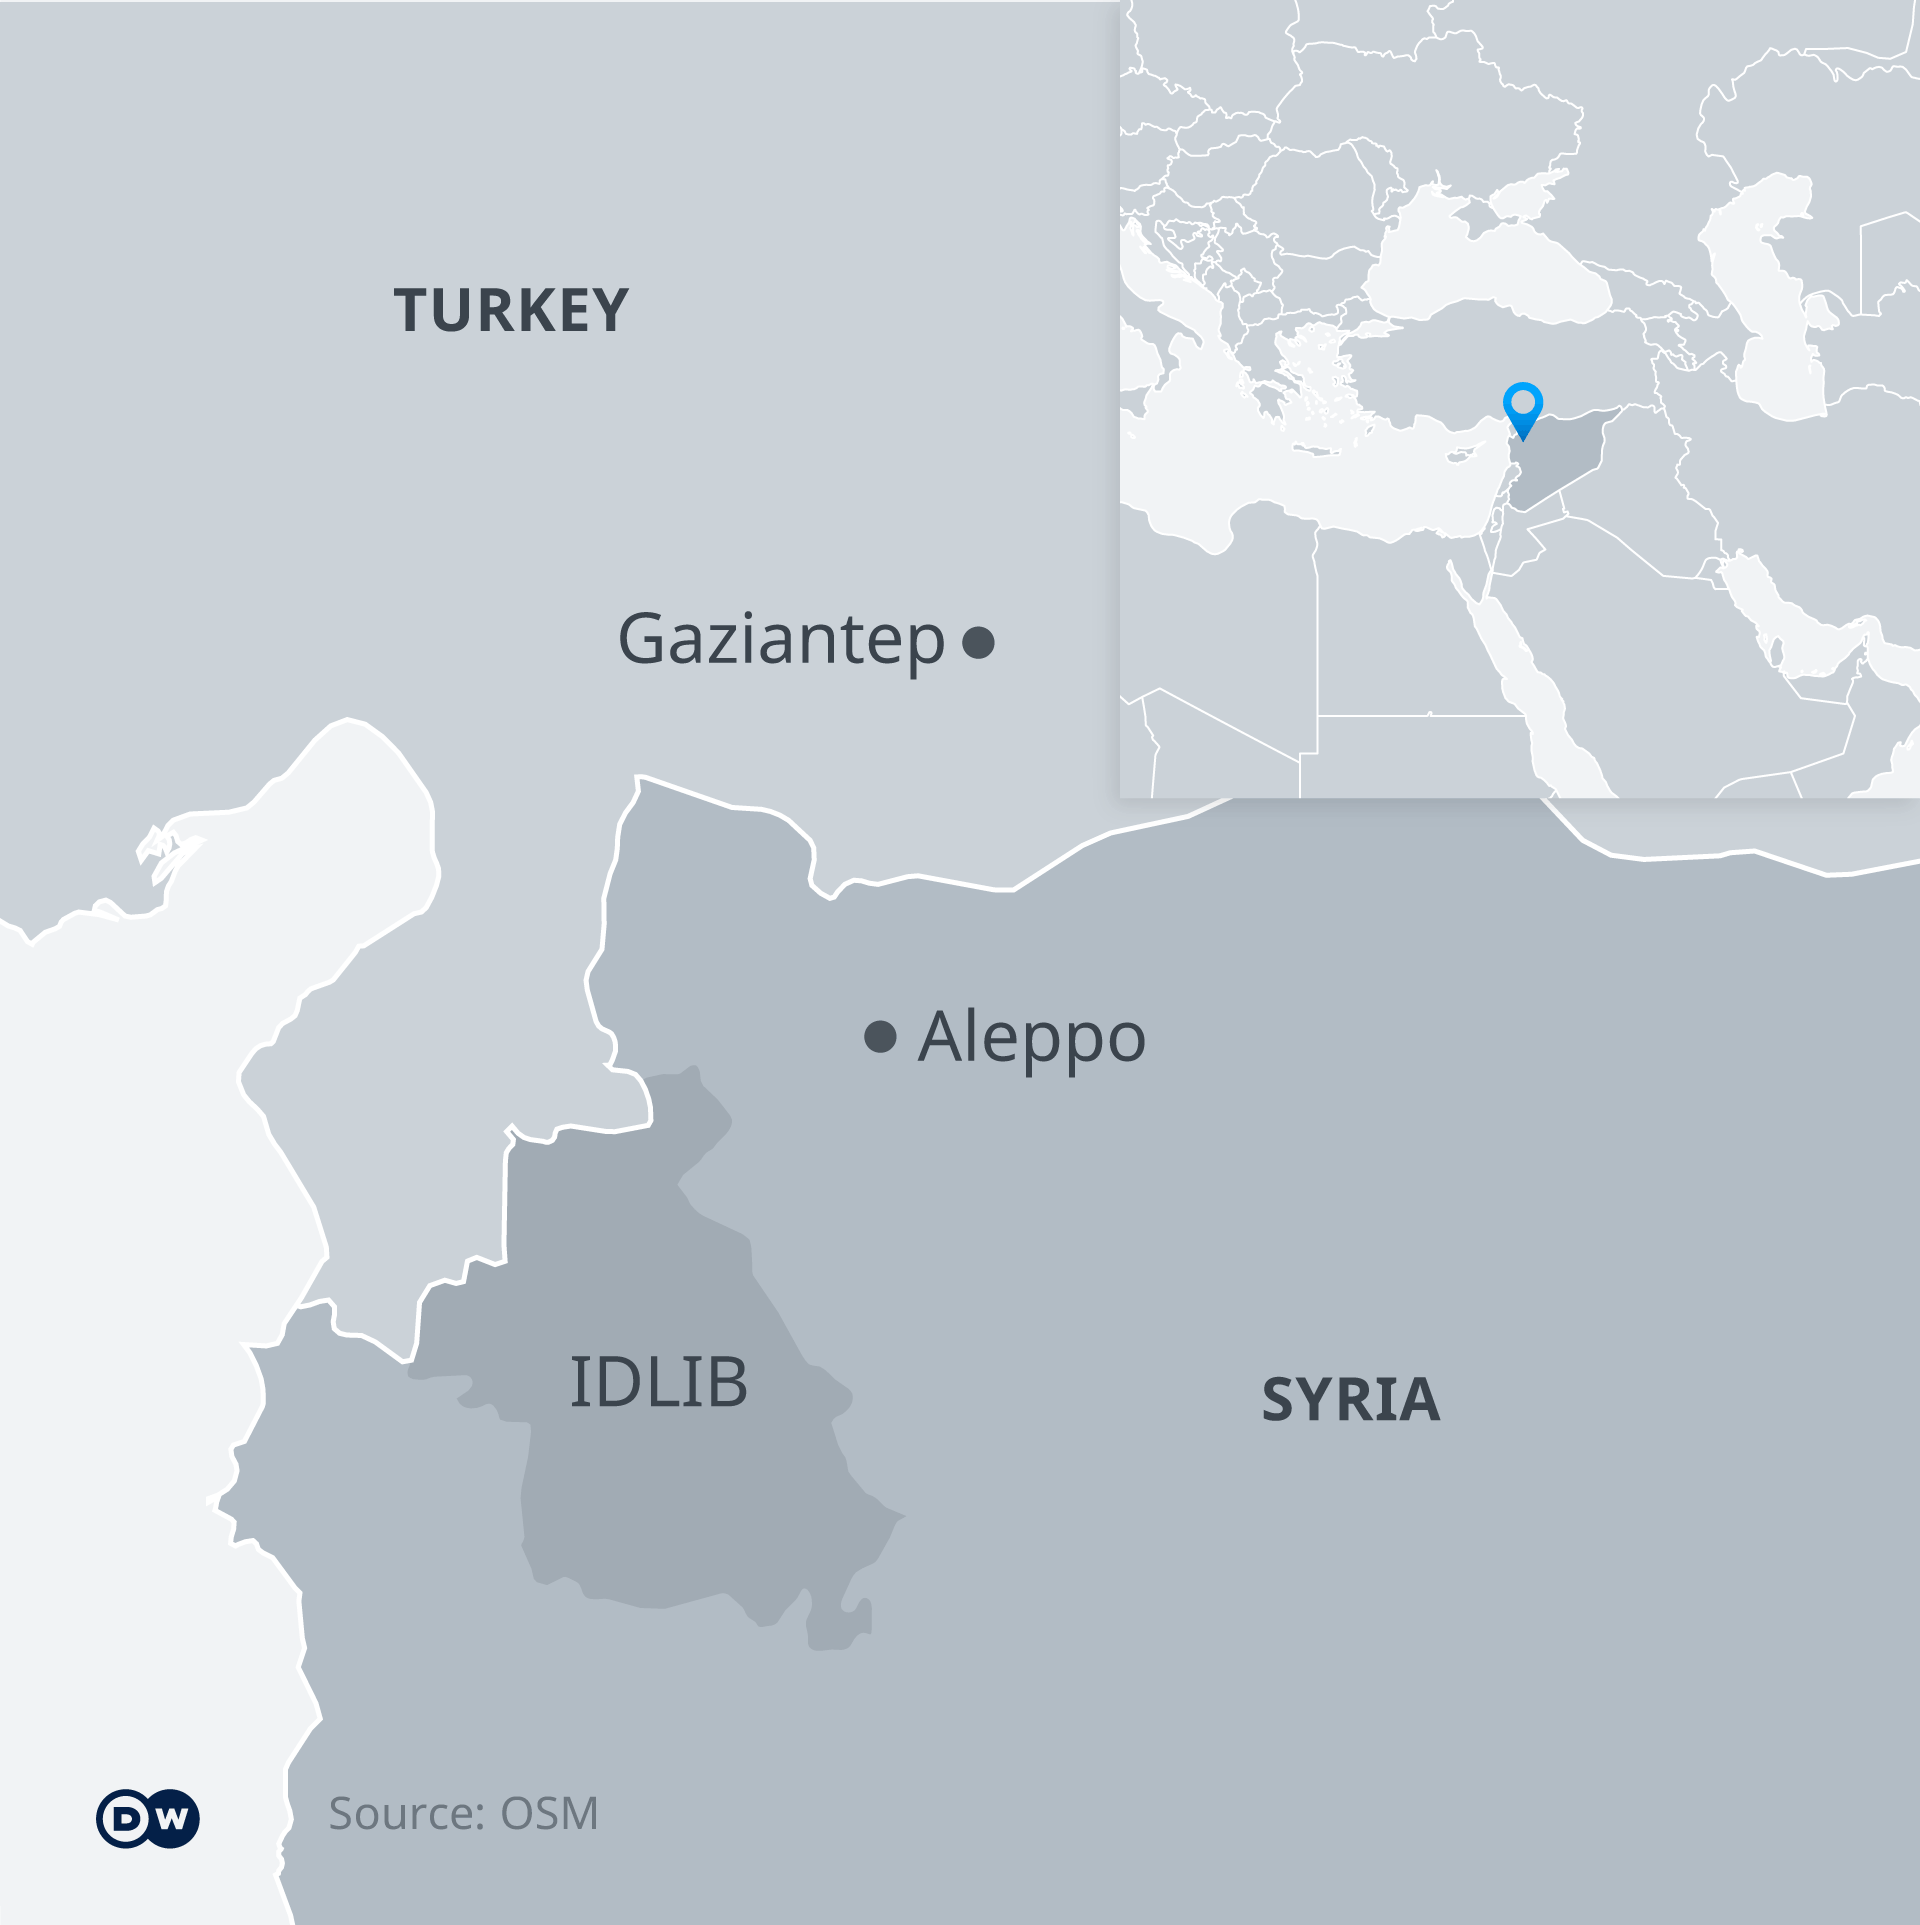 A map showing Turkey and Syria, highlighting Idlib, Aleppo and Gaziantep